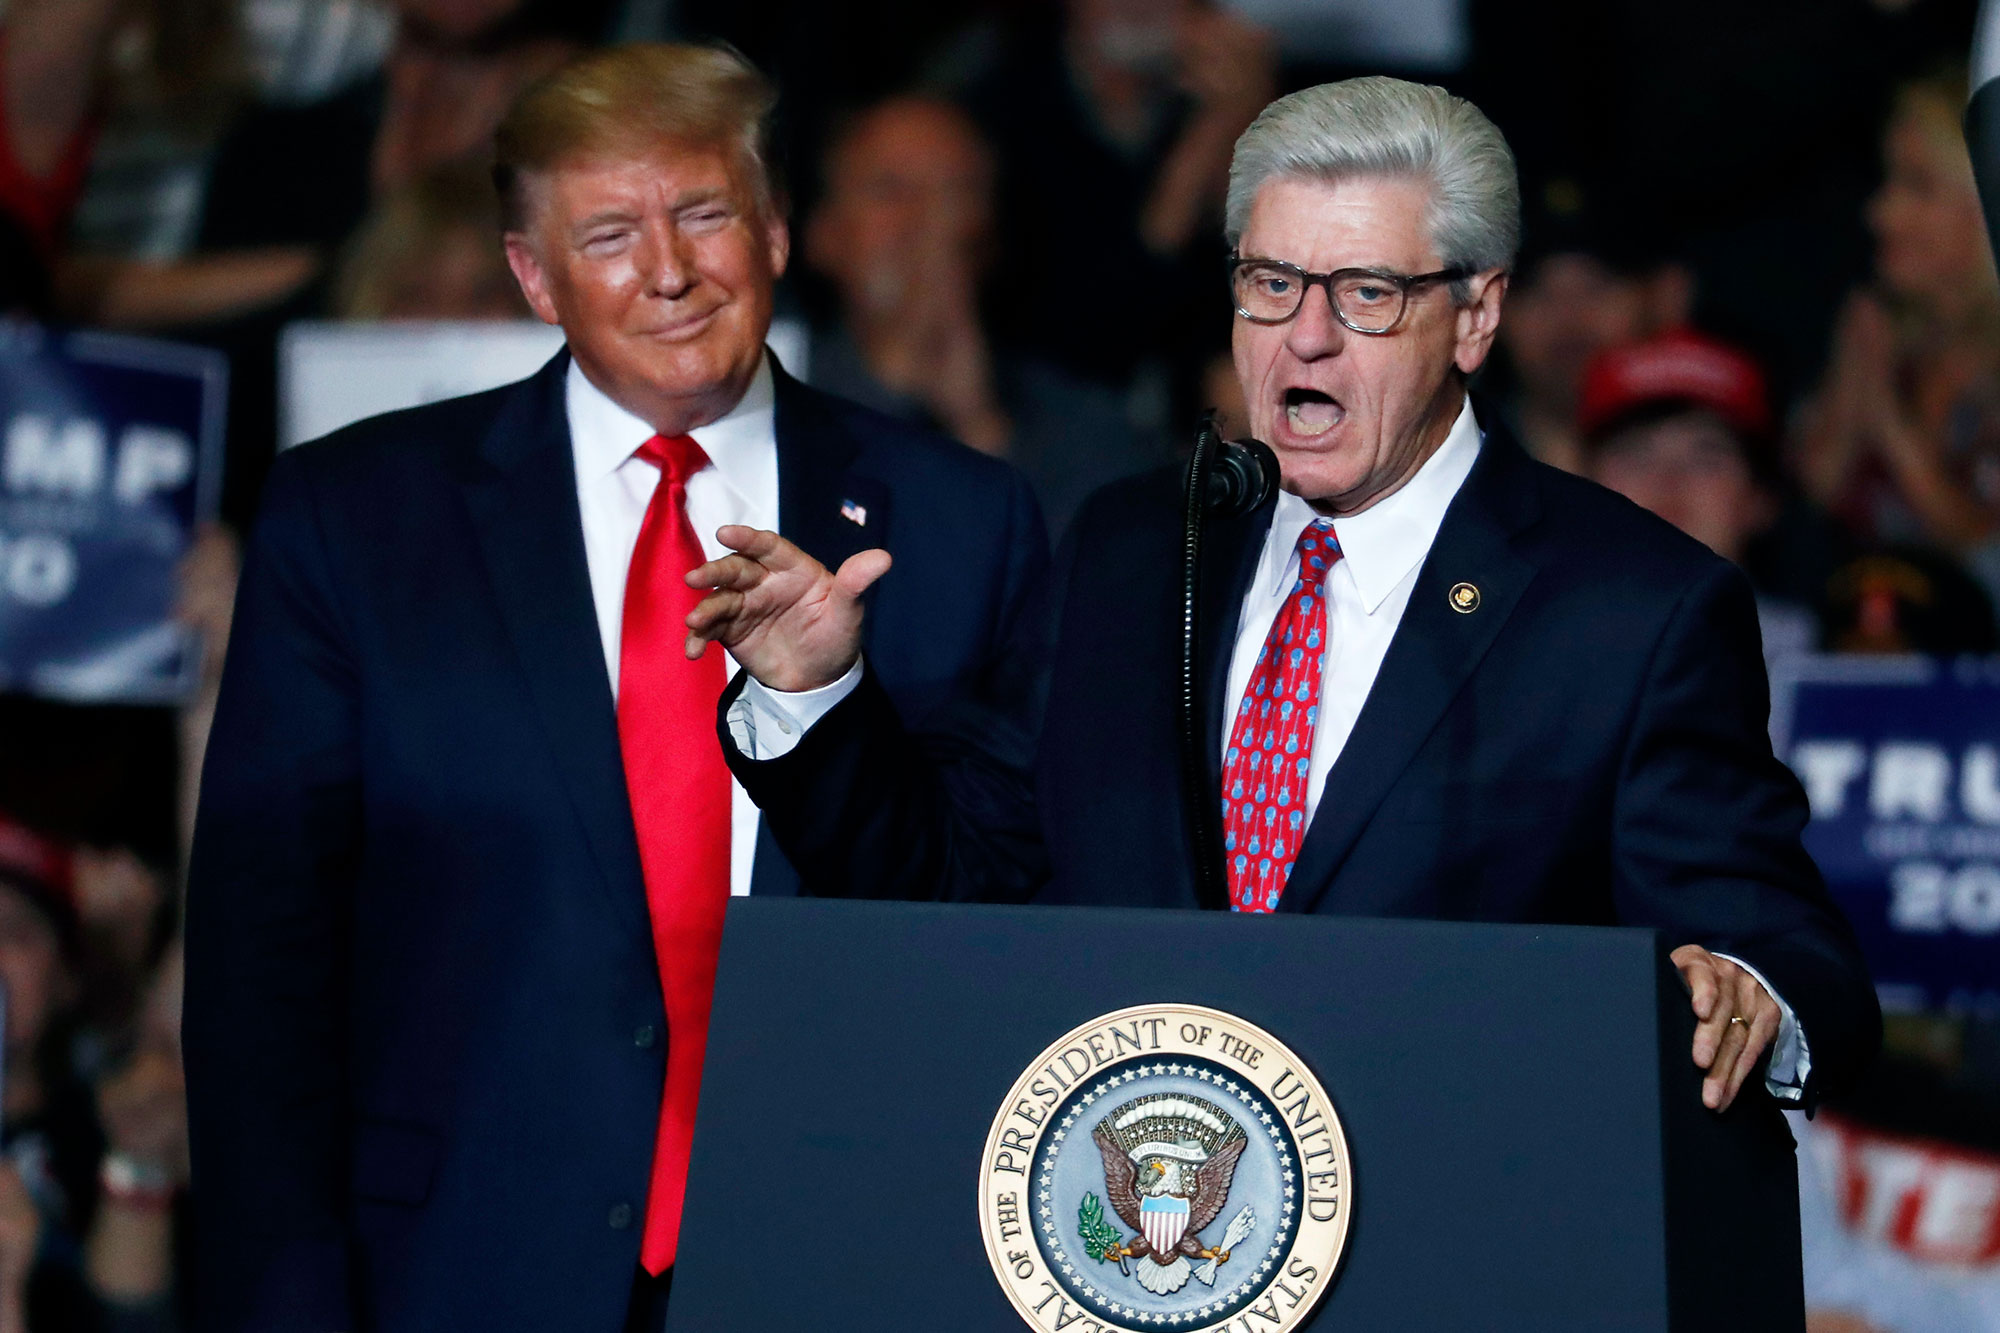 Donald Trump listens to Phil Bryant speak at a rally